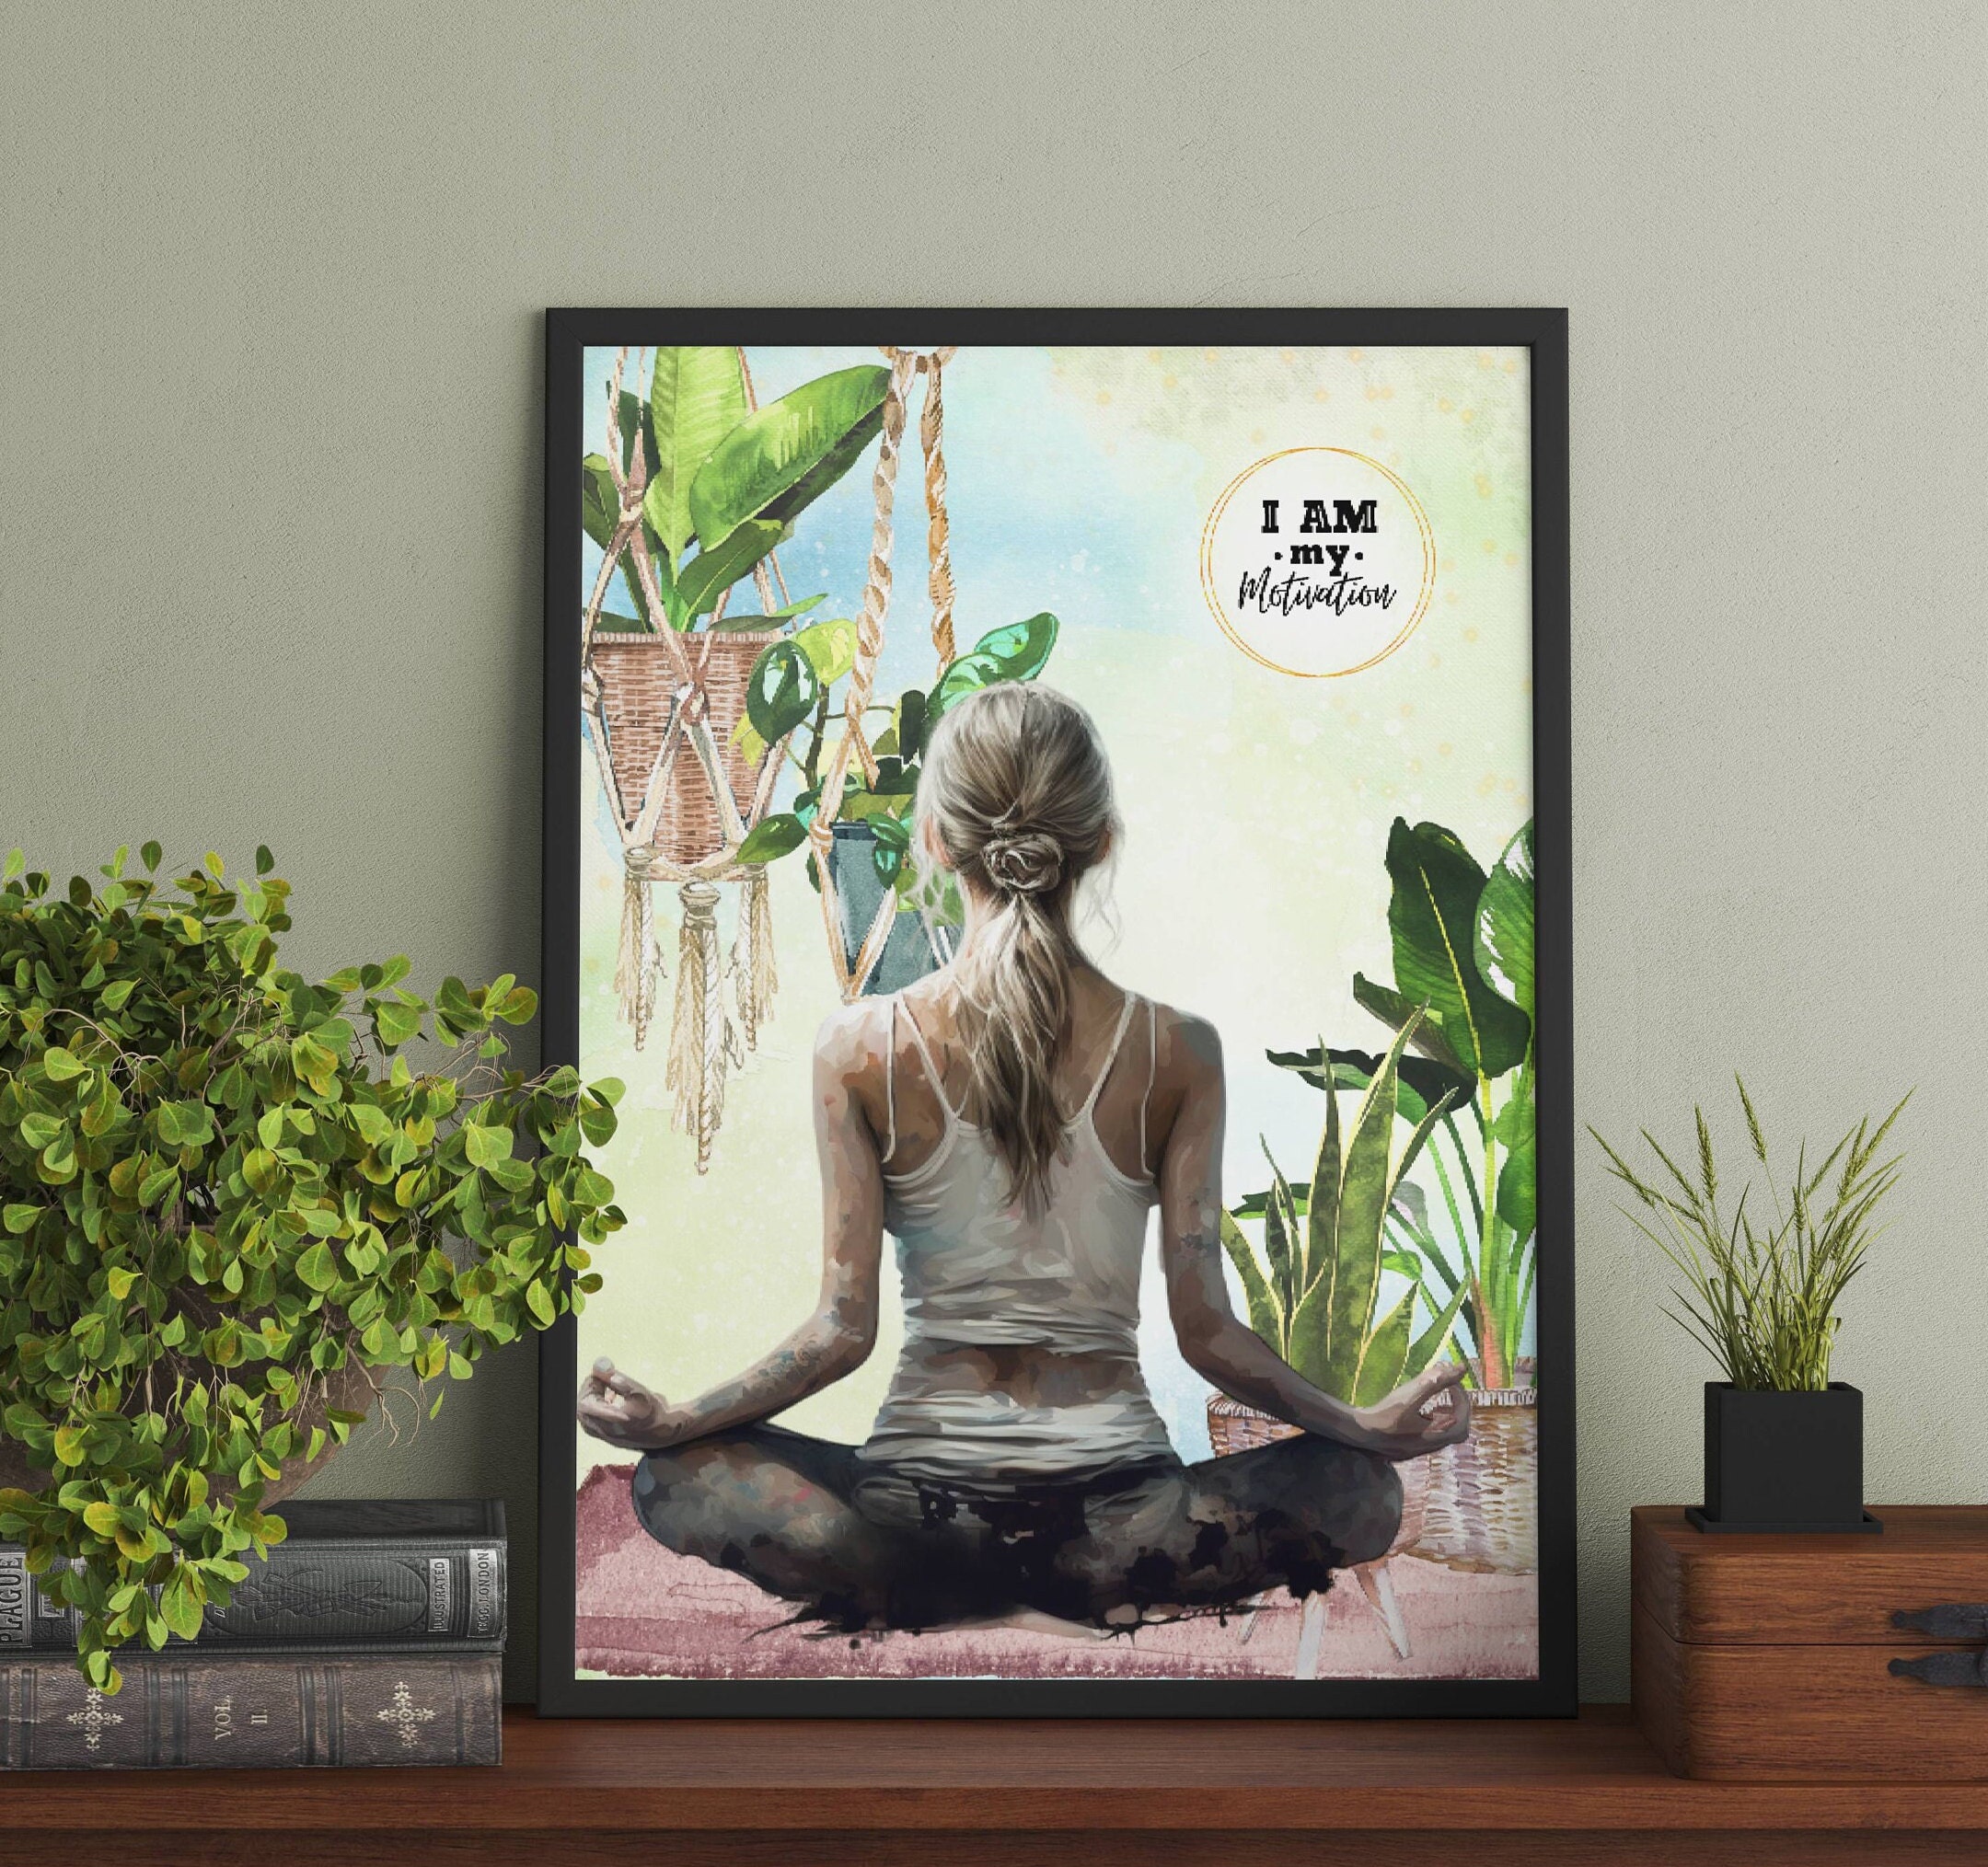 Benefits of Yoga Poster Health and Wellbeing Fitness Meditation Mind, Body  & Spirit Wall Decor A2, A3, A4 Wall Art Print Poster 